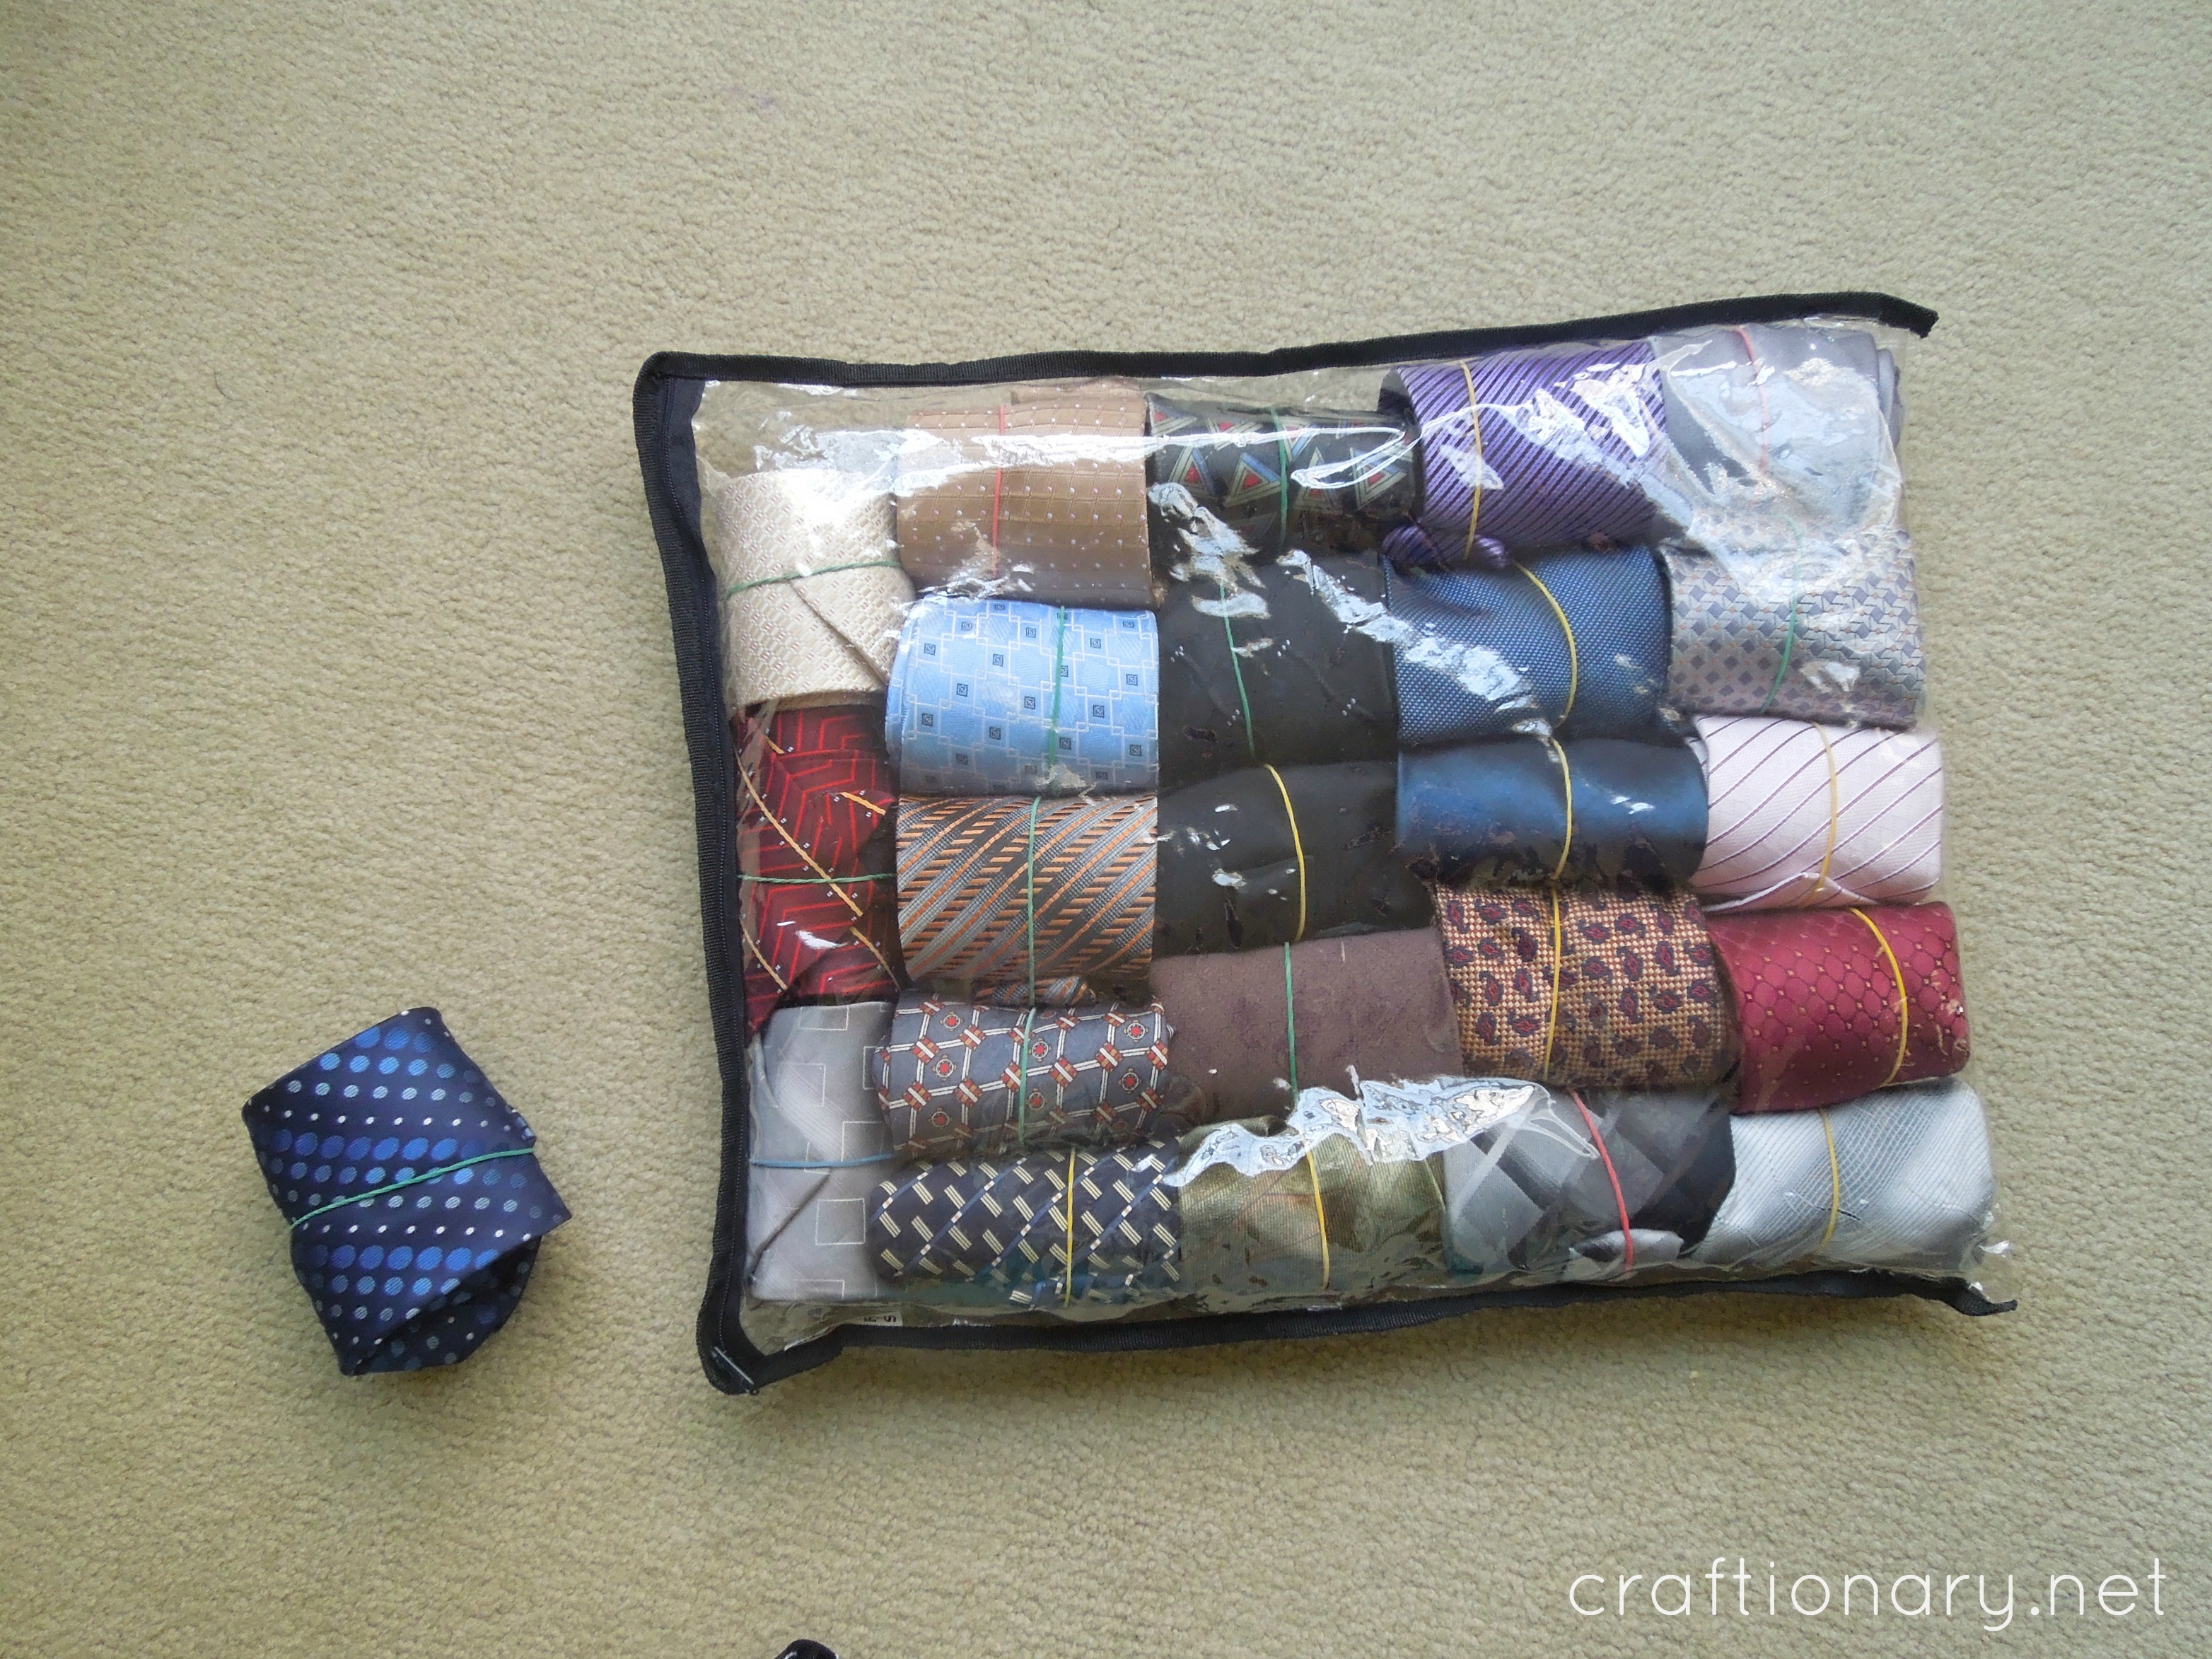 How to organize ties in your closet at home? - Craftionary